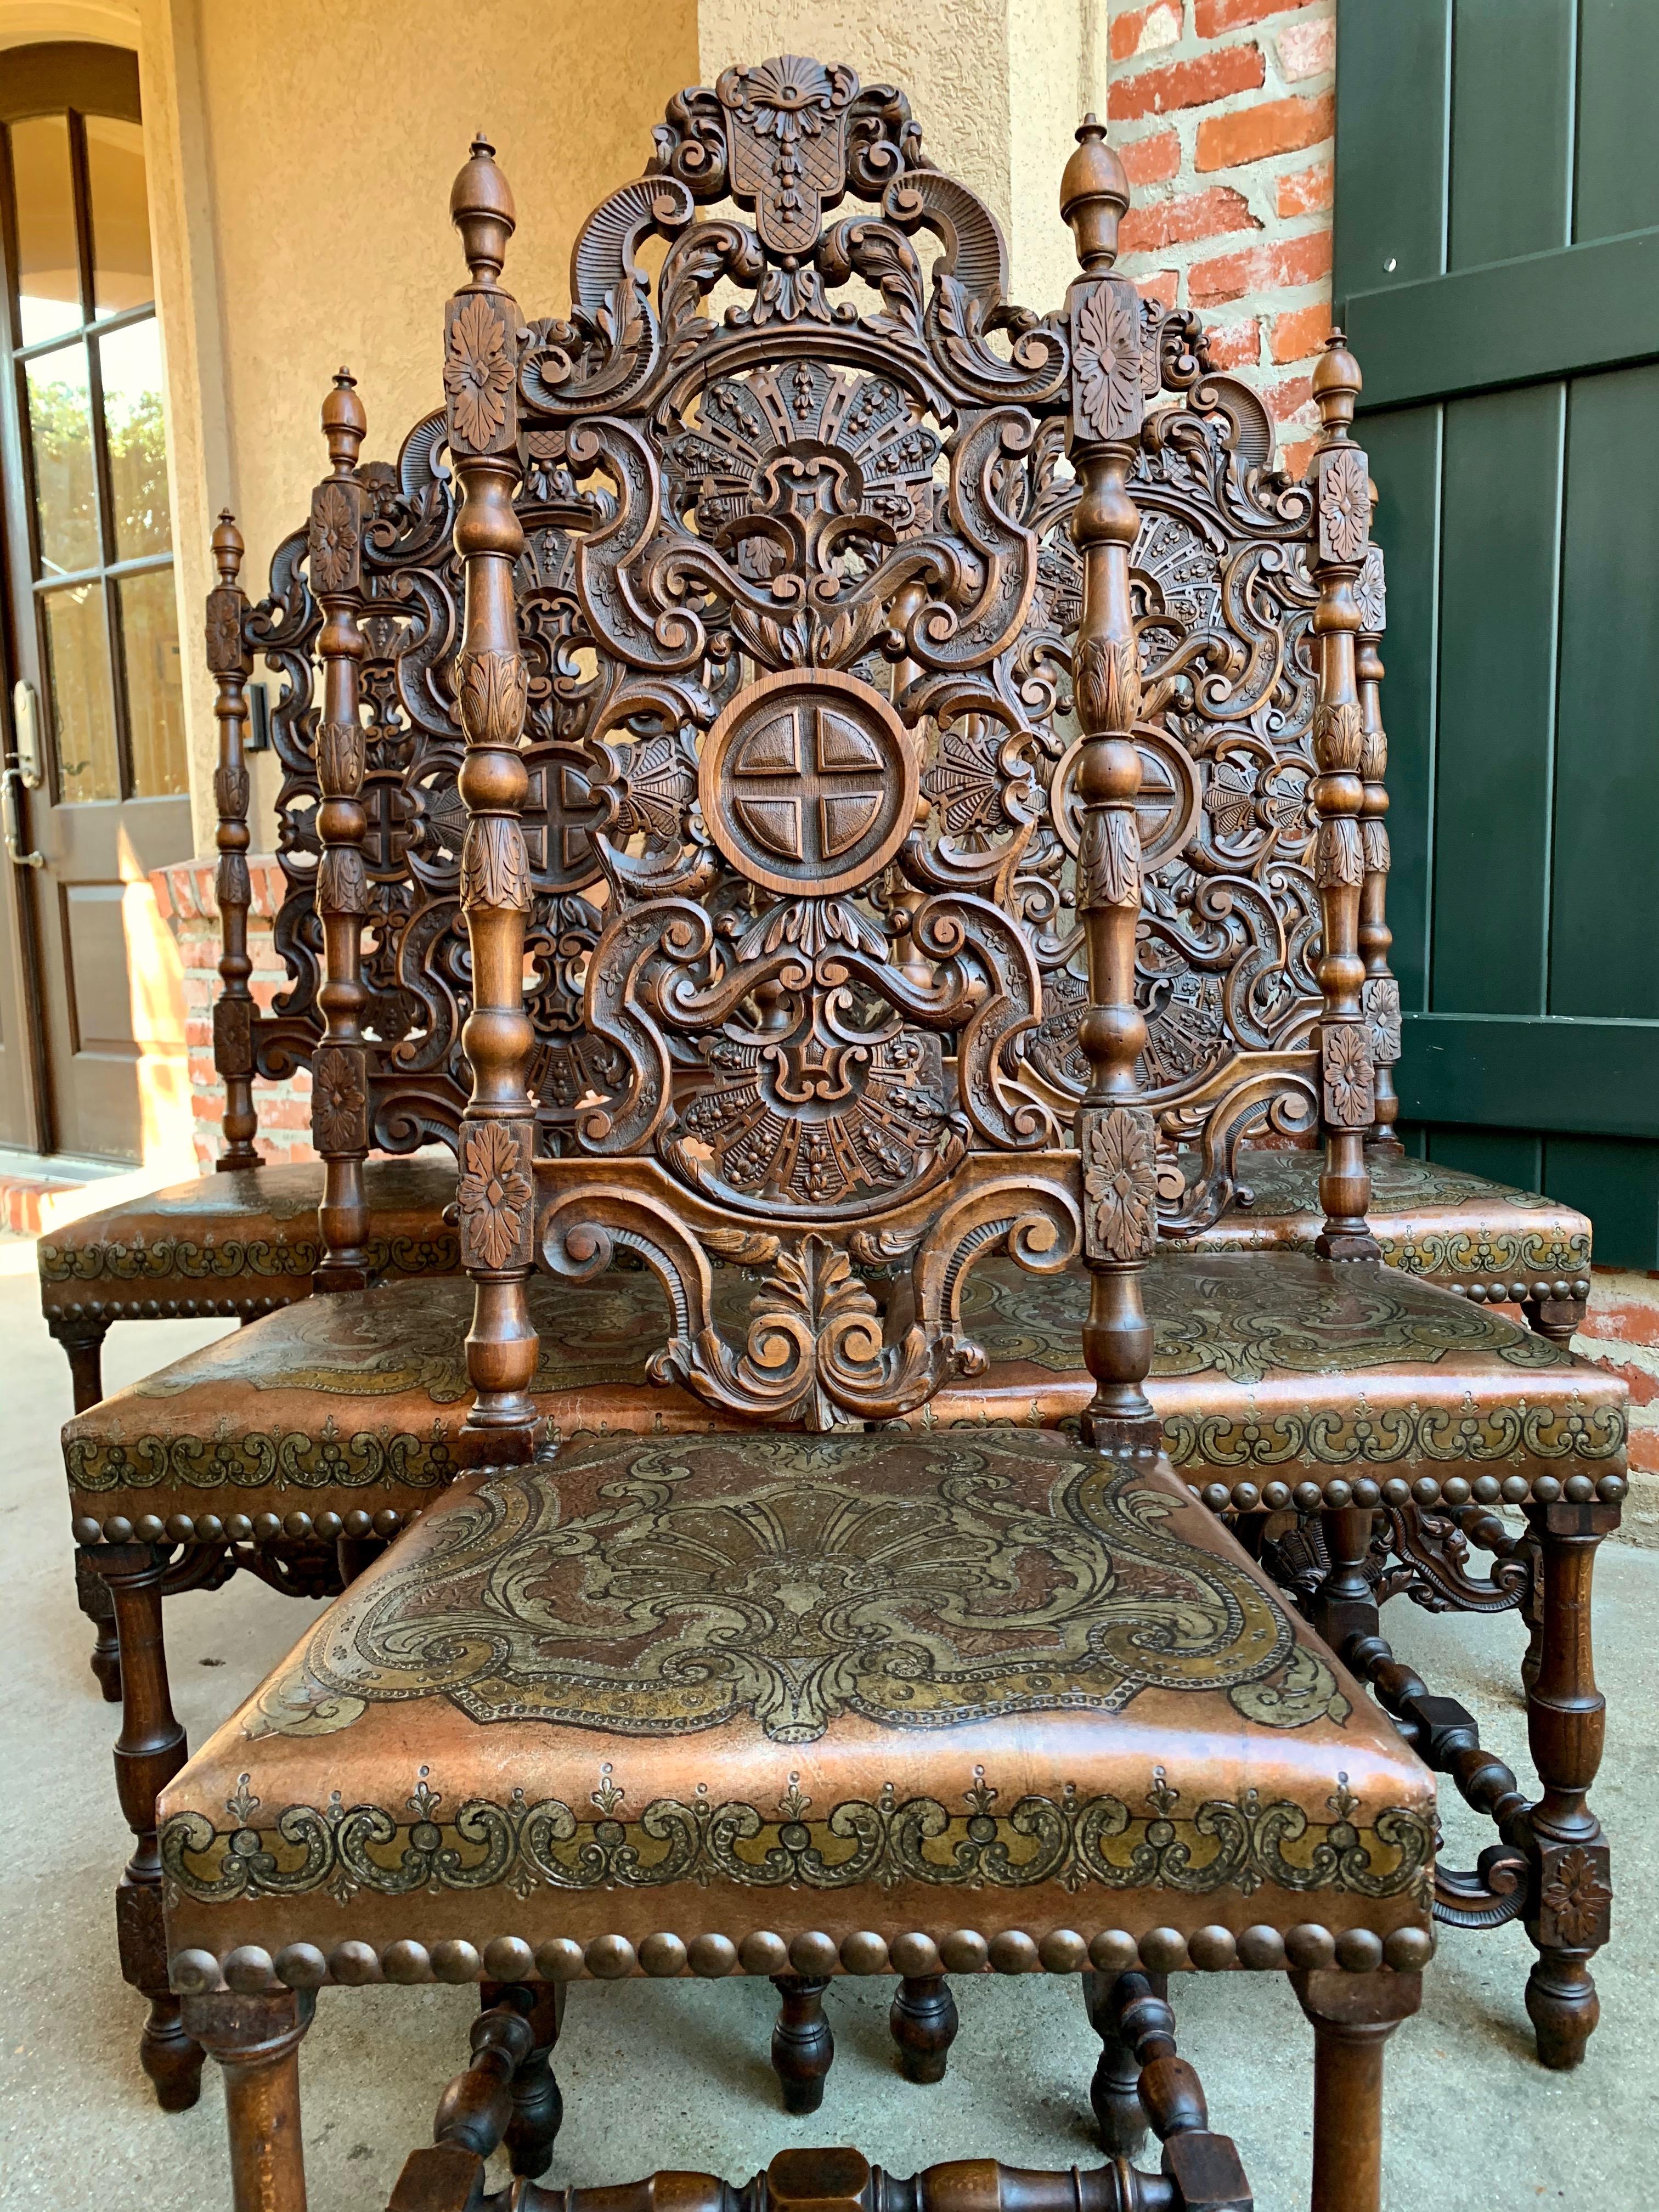 Direct from France, a majestically tall (over 4 ft.) set of 6 antique French dining chairs with outstanding open carved back splats and stunning embossed leather seats!
~Meticulous hand carved details on the back, with upper carved medallion